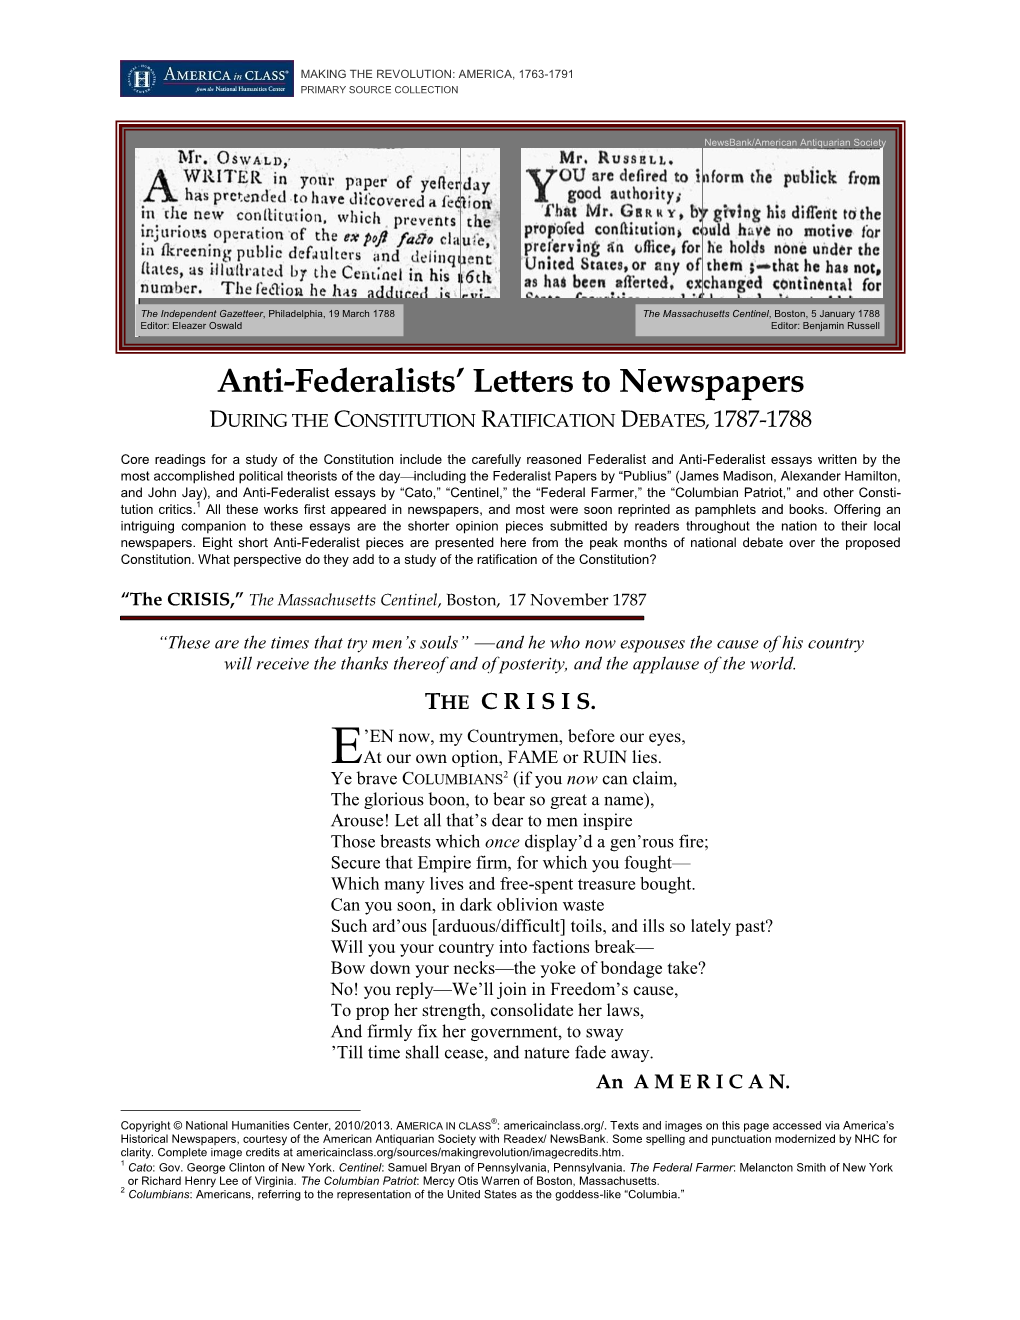 Anti-Federalist Letters to Newspapers on the Proposed Constitution, 1787-88 2 “Ship News,” American Herald, Boston, Massachusetts, 28 January 1788